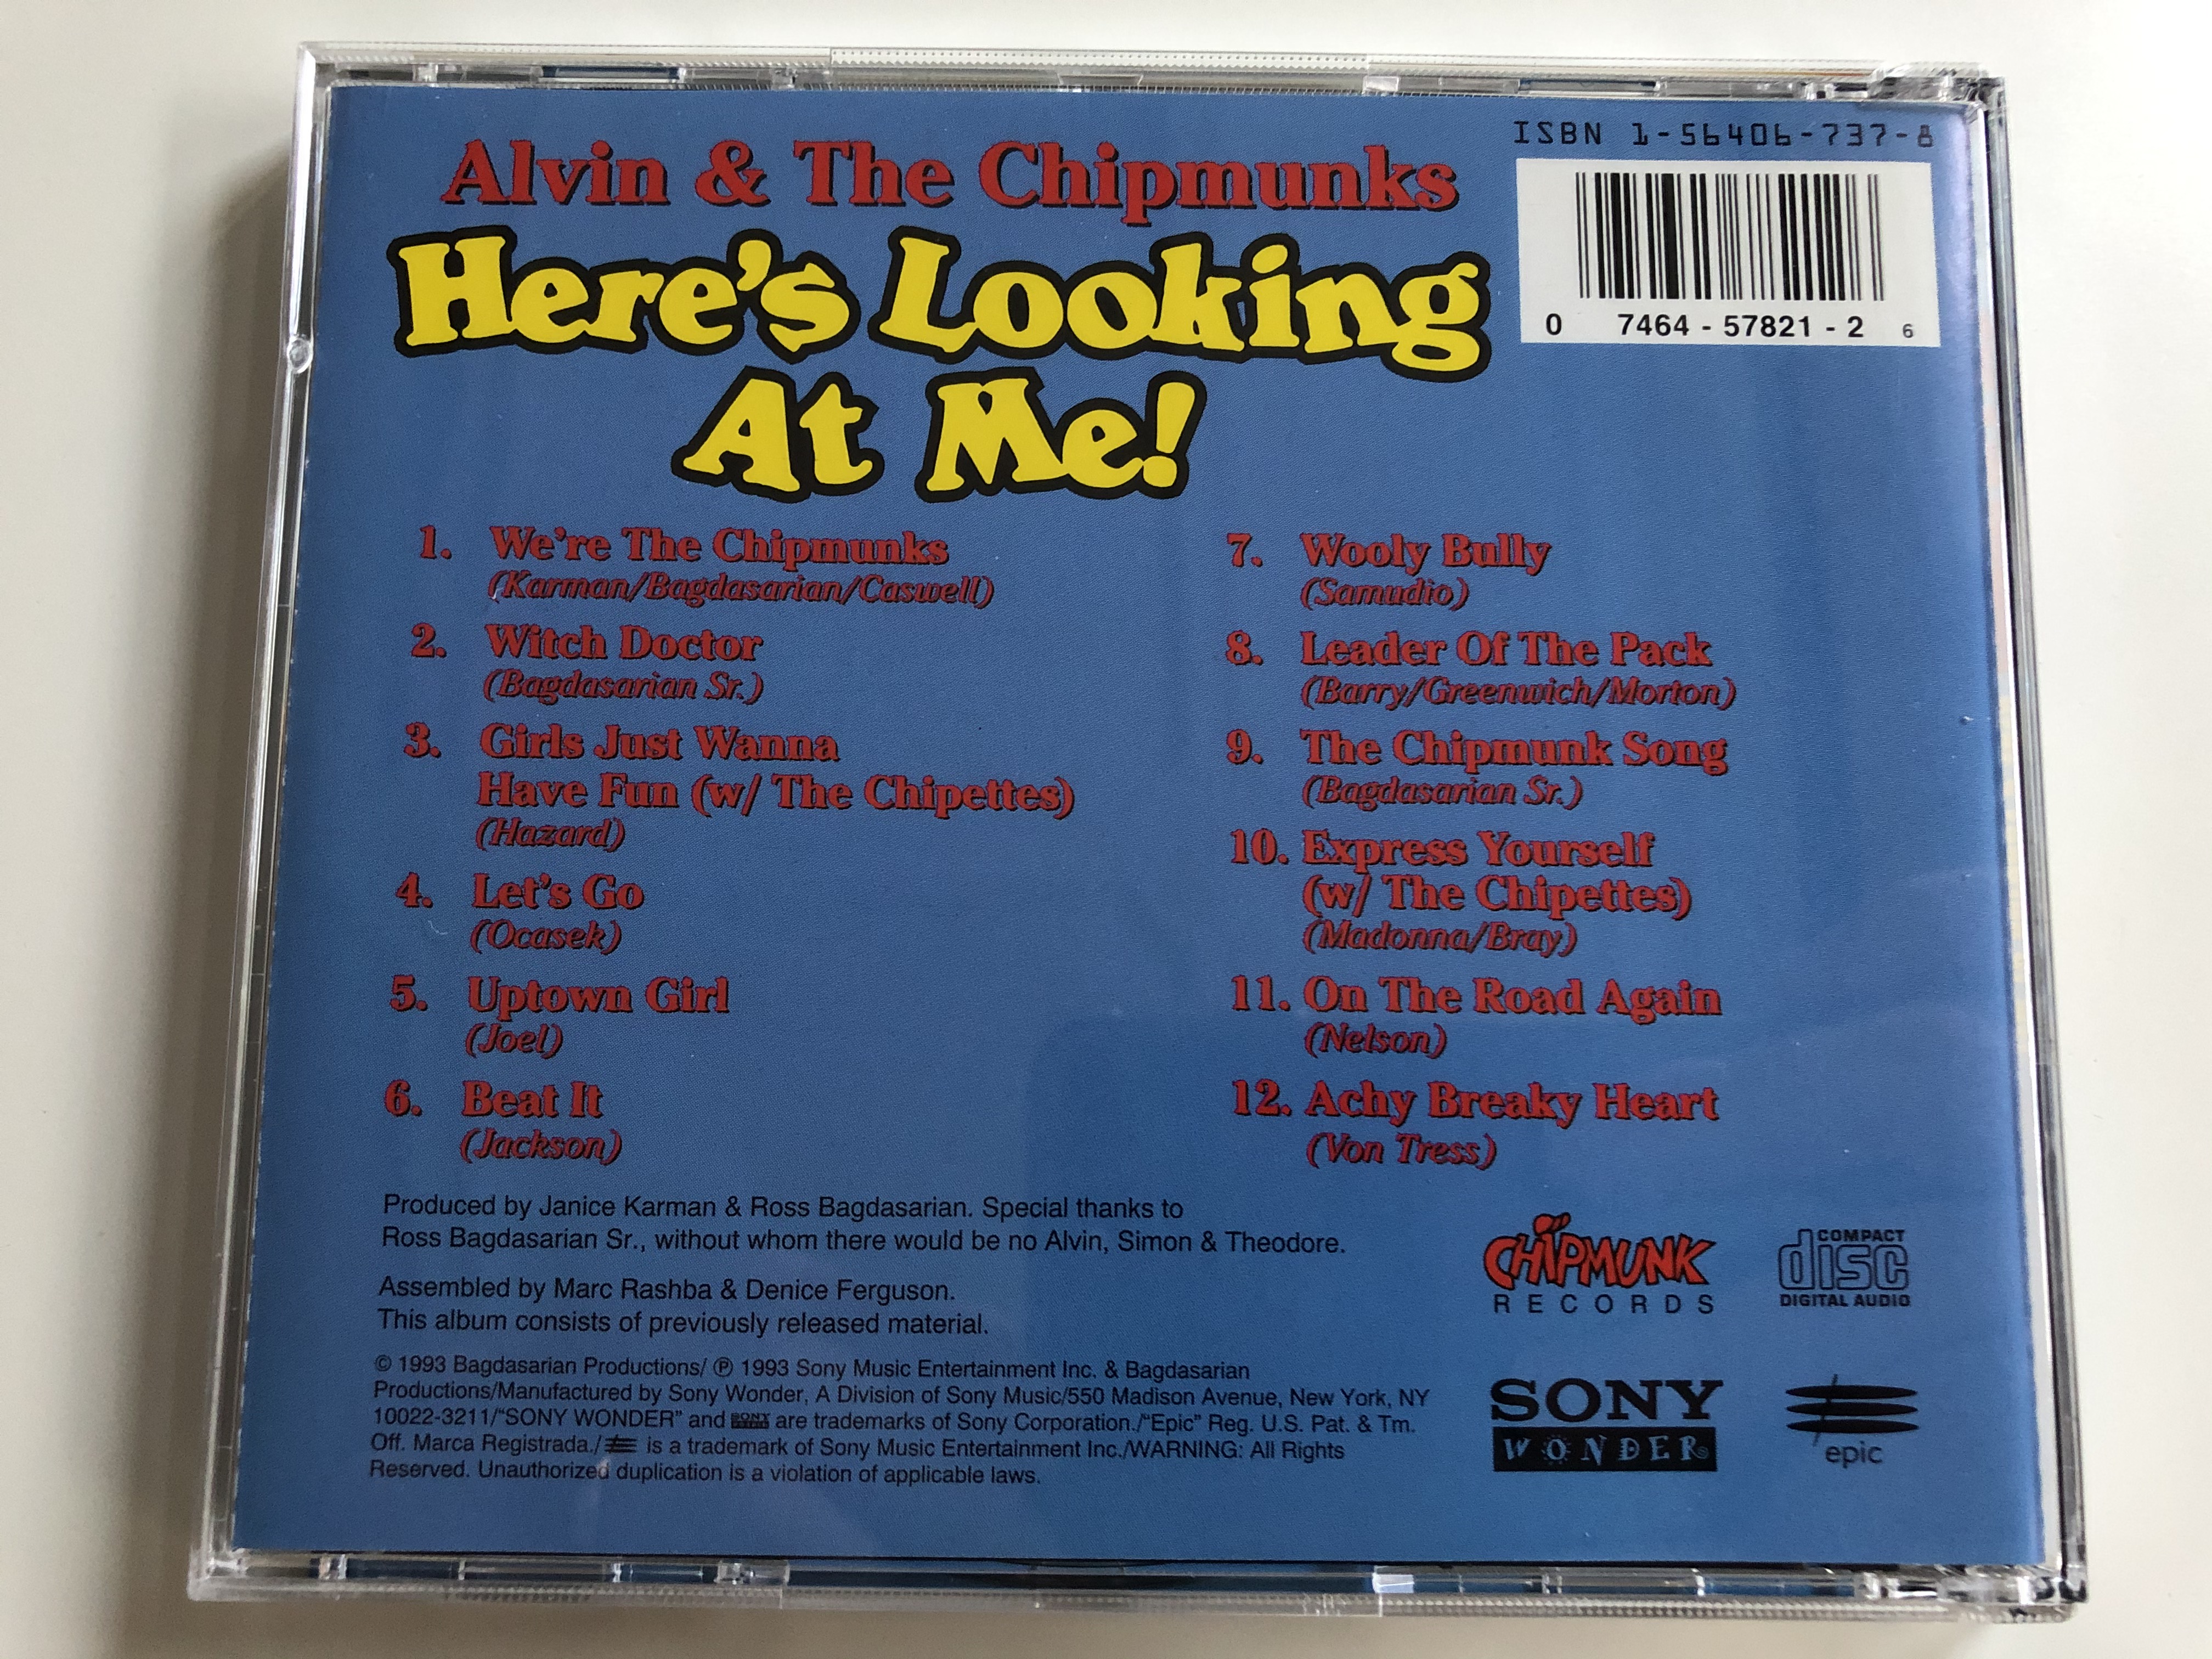 alvin-the-chipmunks-here-s-looking-at-me-featuring-music-from-chipmunk-punk-chipmunks-in-low-places-and-others-35-years-of-chipmunk-classics-chipmunk-records-audio-cd-1993-lk-57821-5-.jpg